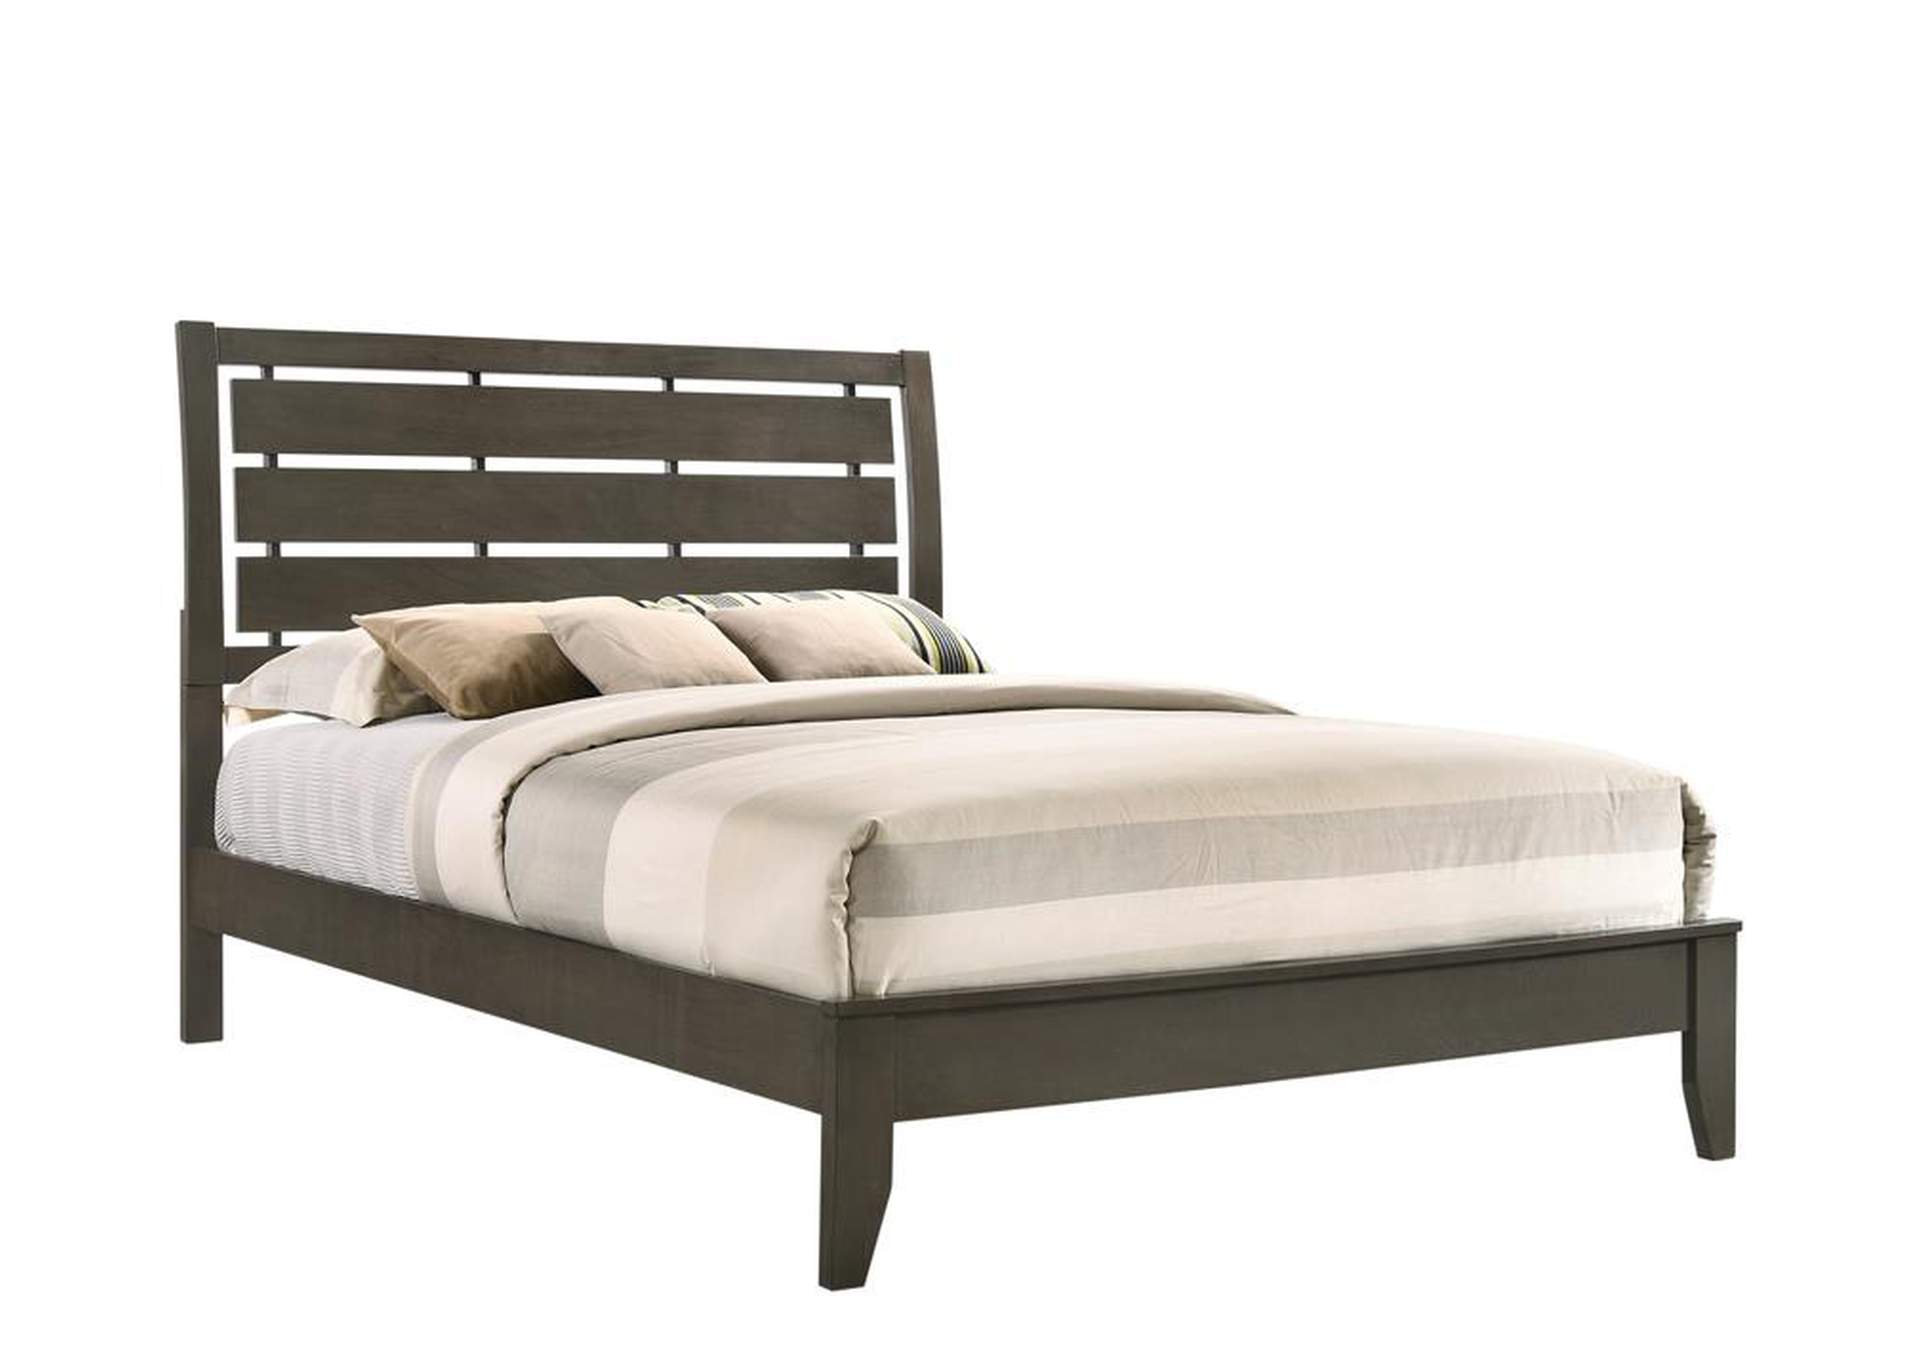 Eastern King Bed Best Furniture And, Eastern King Size Bed Frame